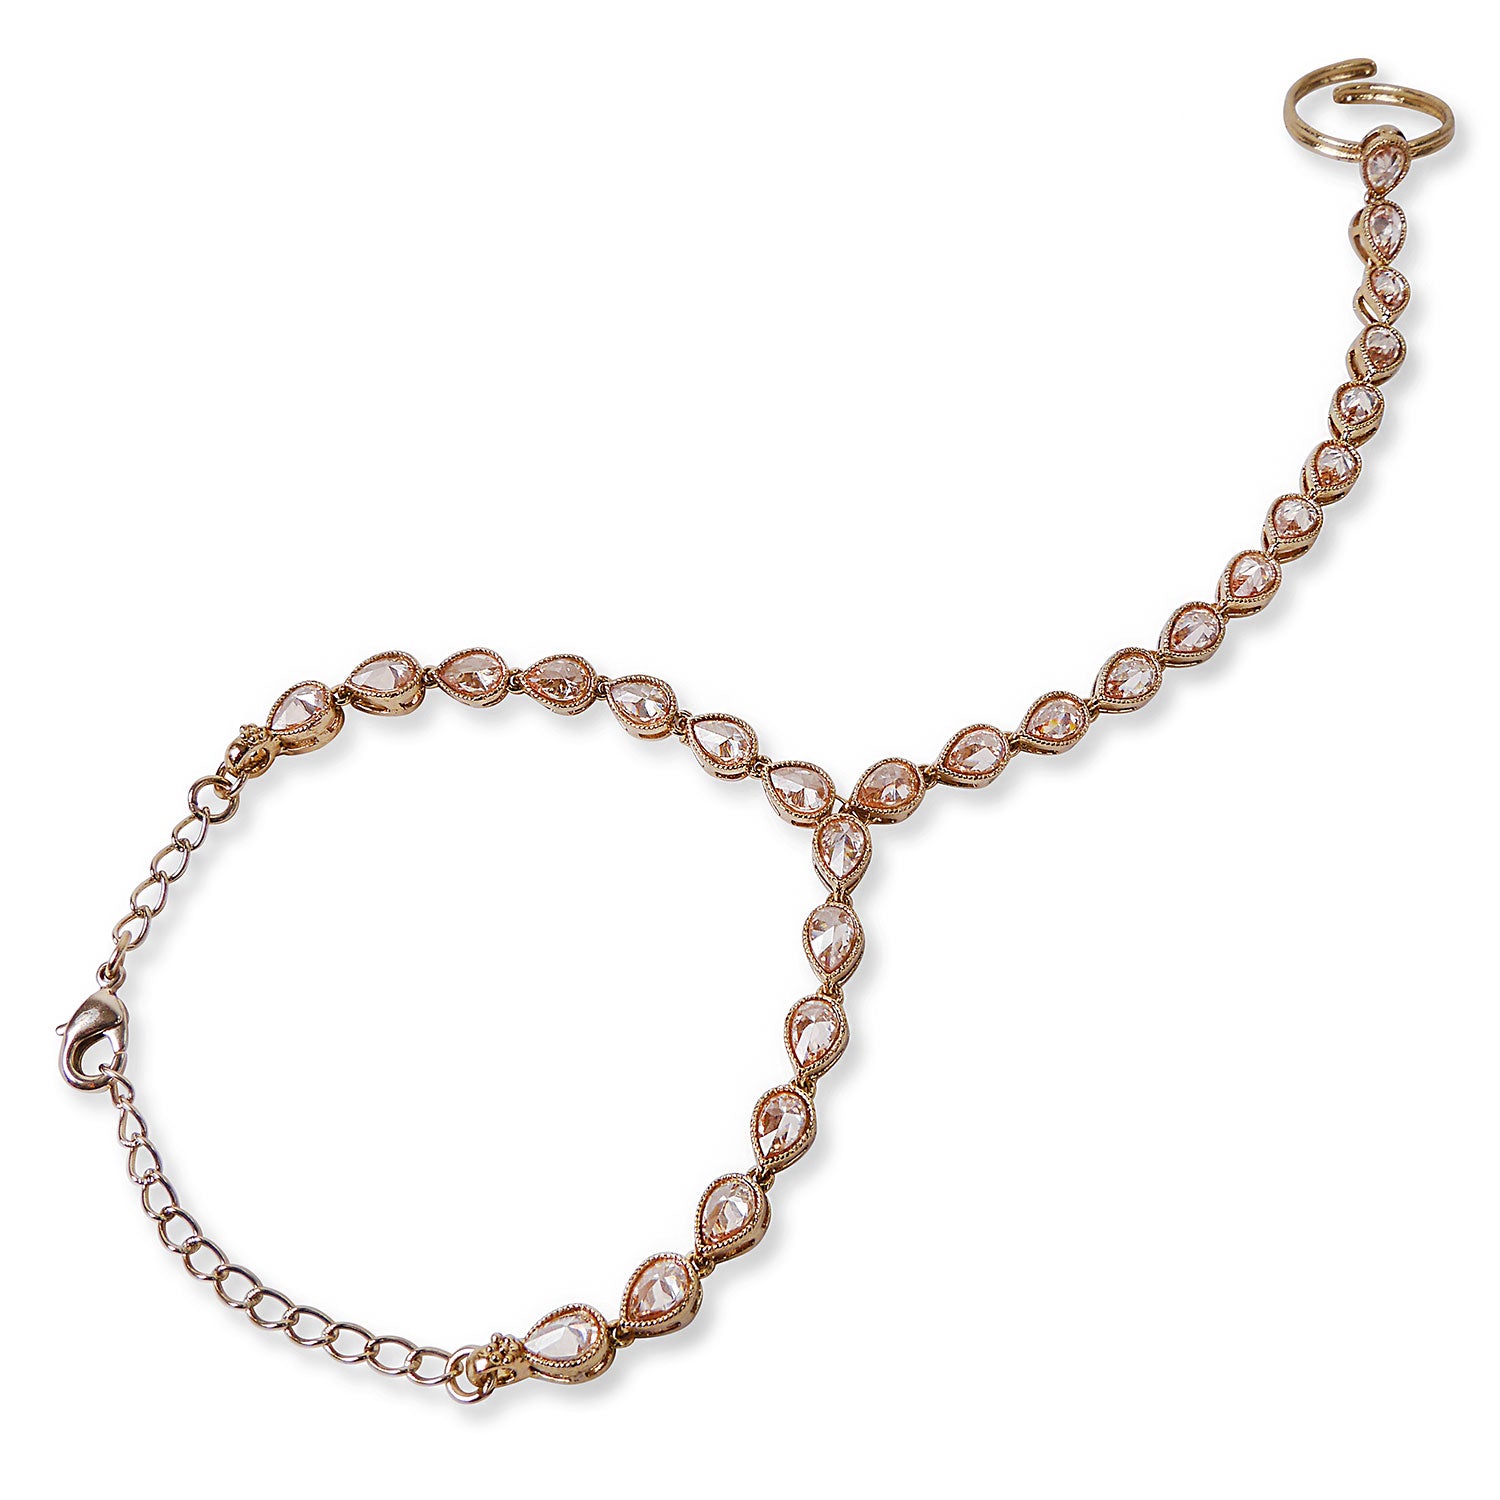 Pear Crystal Hand Chain in Antique Gold